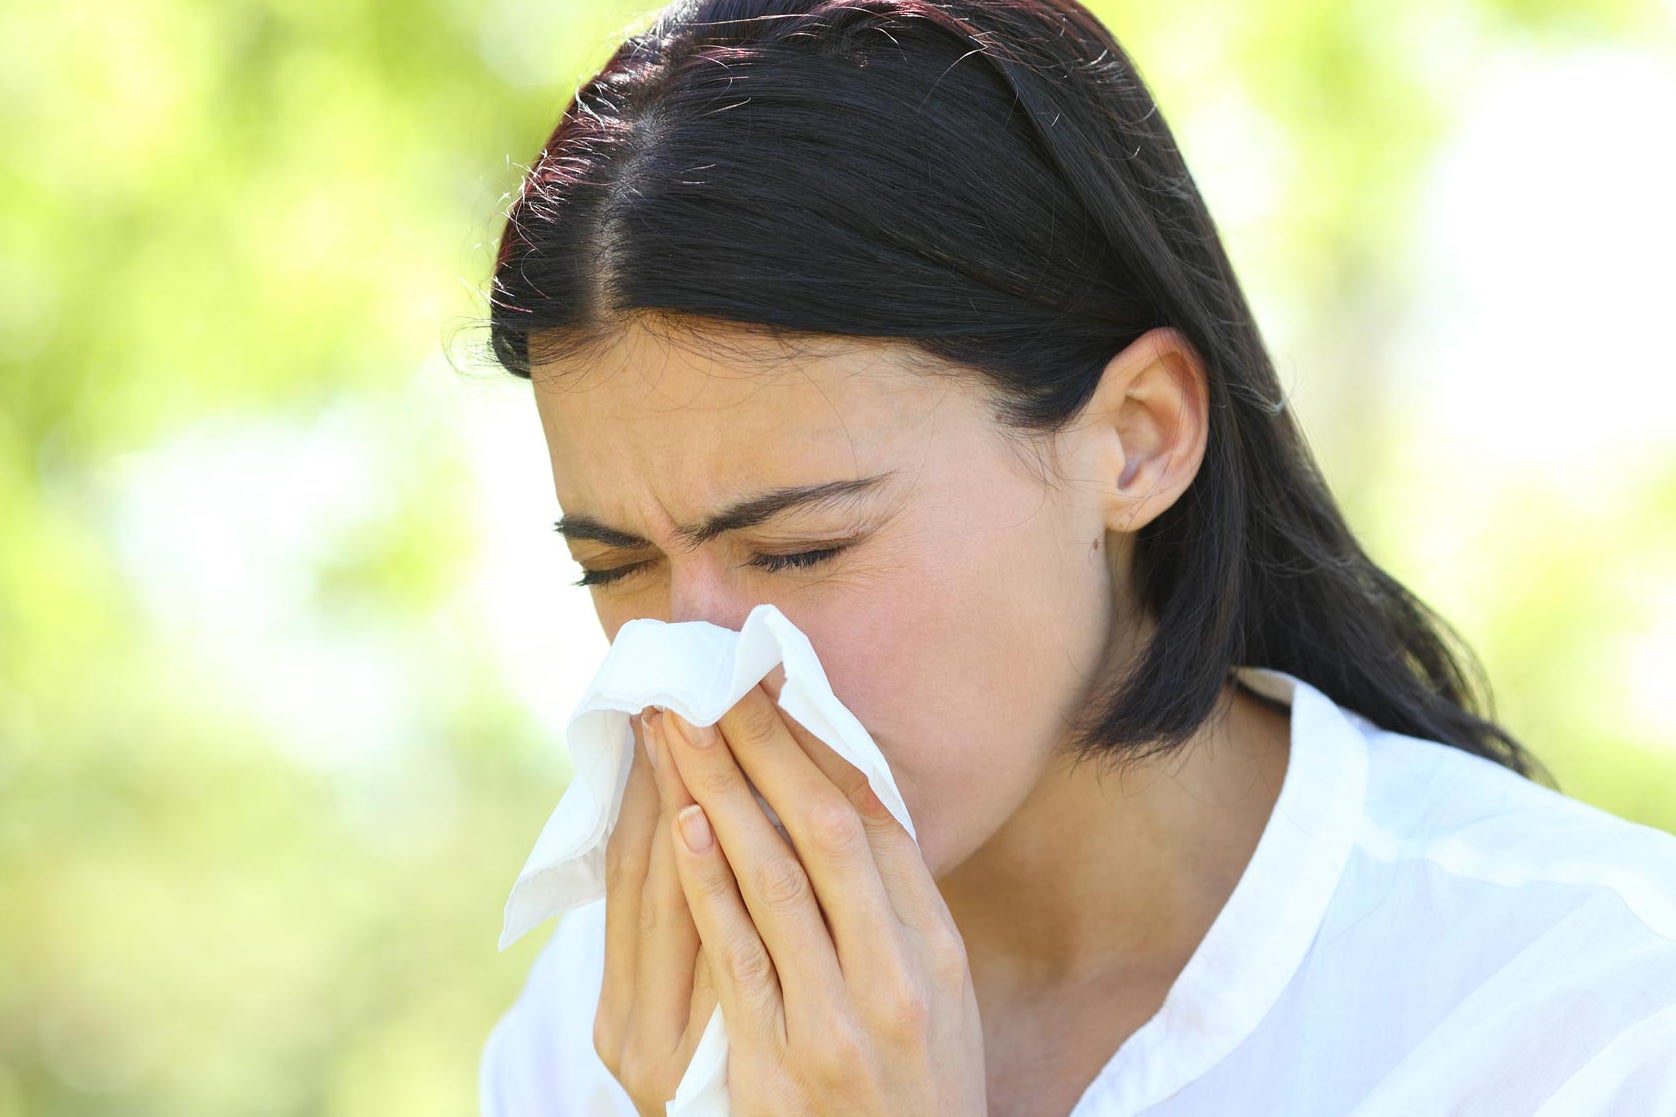 A woman sitting outside sneezes into a tissue.